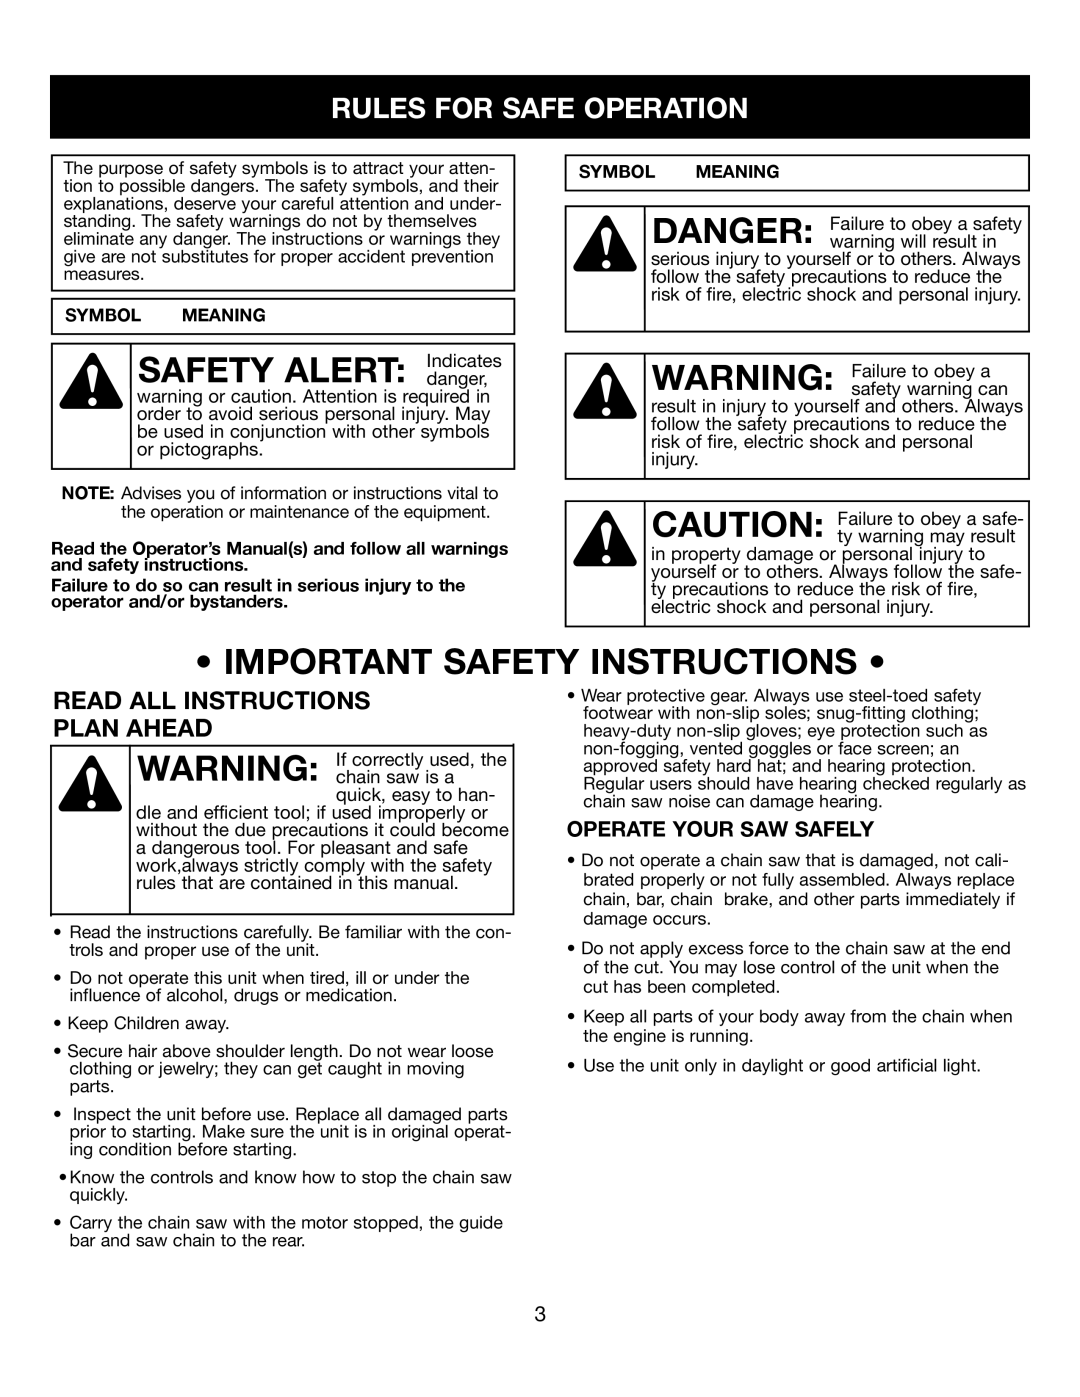 Craftsman 316.34107 manual Important Safety Instructions, Rules For Safe Operation, Read All Instructions Plan Ahead 